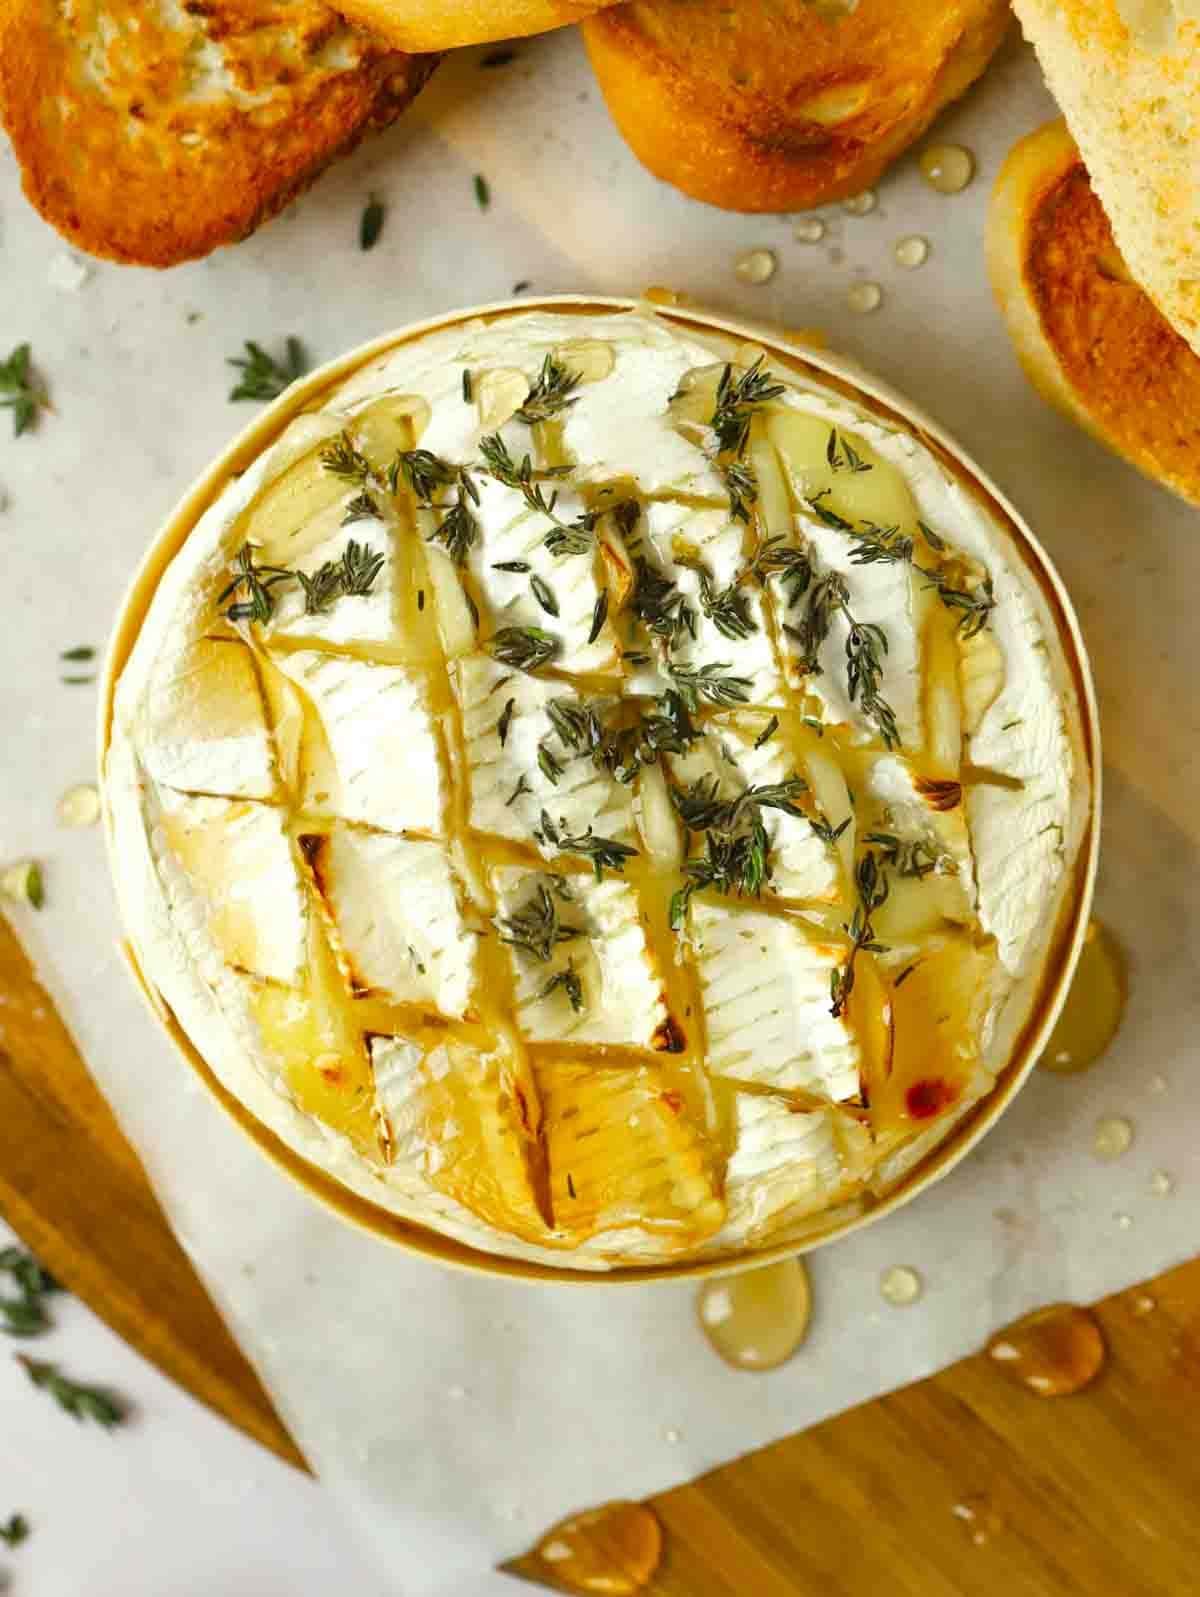 A baked round of camembert inside a wooden case, on a table with toasted bread at the side. Honey and thyme drizzled on top.